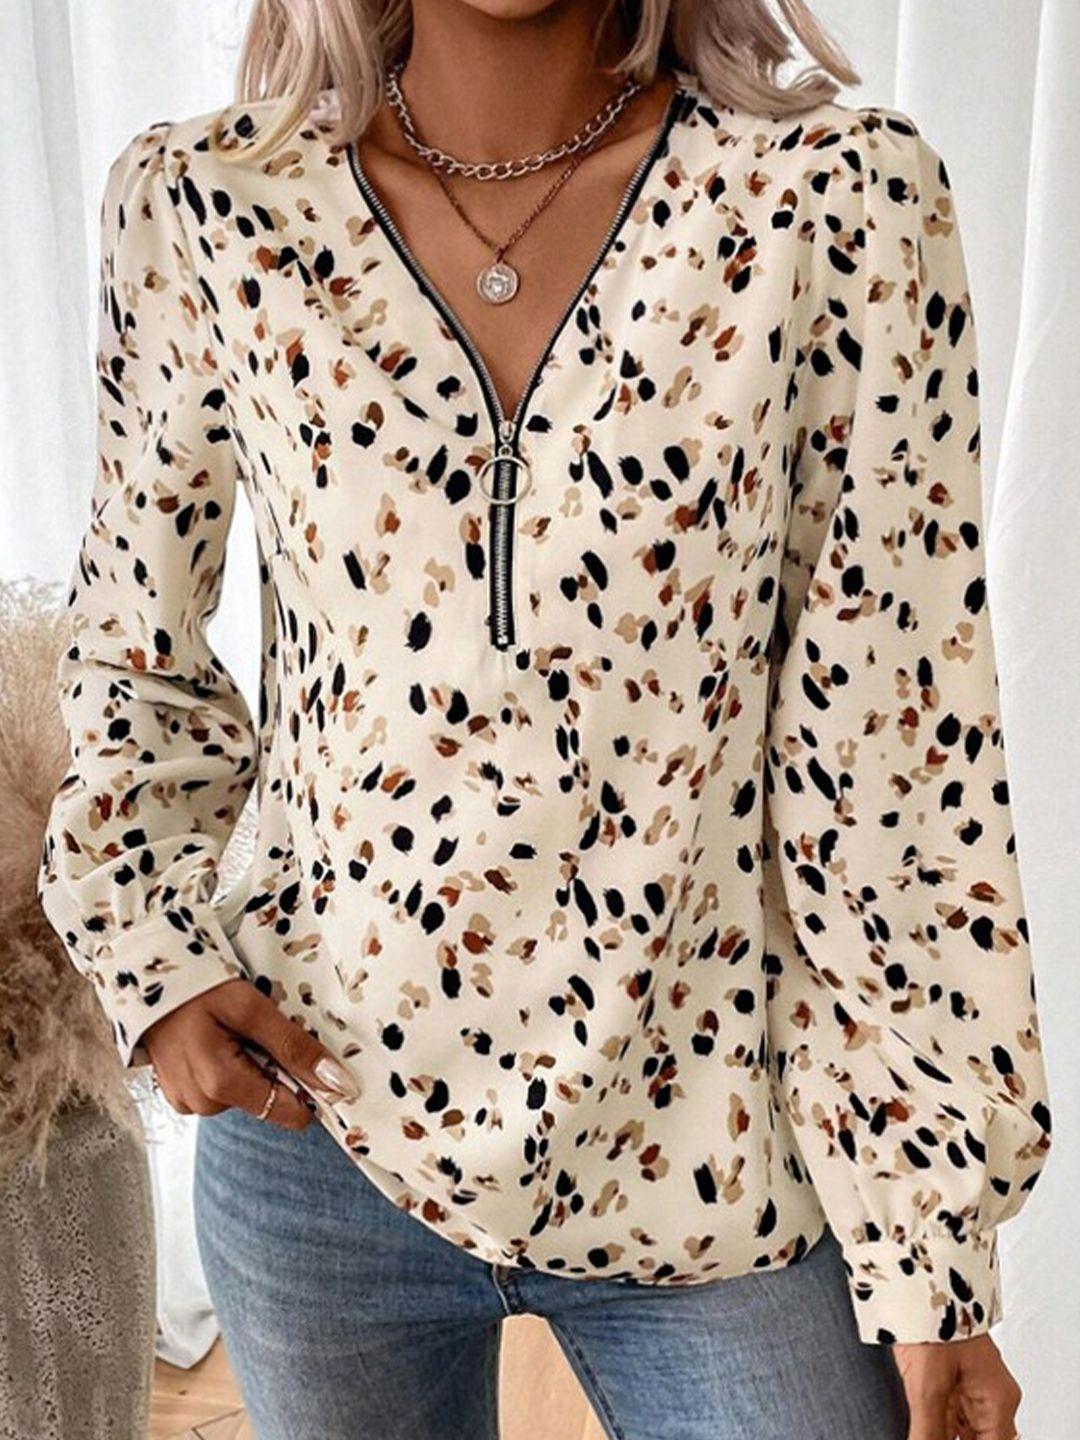 stylecast-beige-animal-printed-v-neck-cuffed-sleeves-top